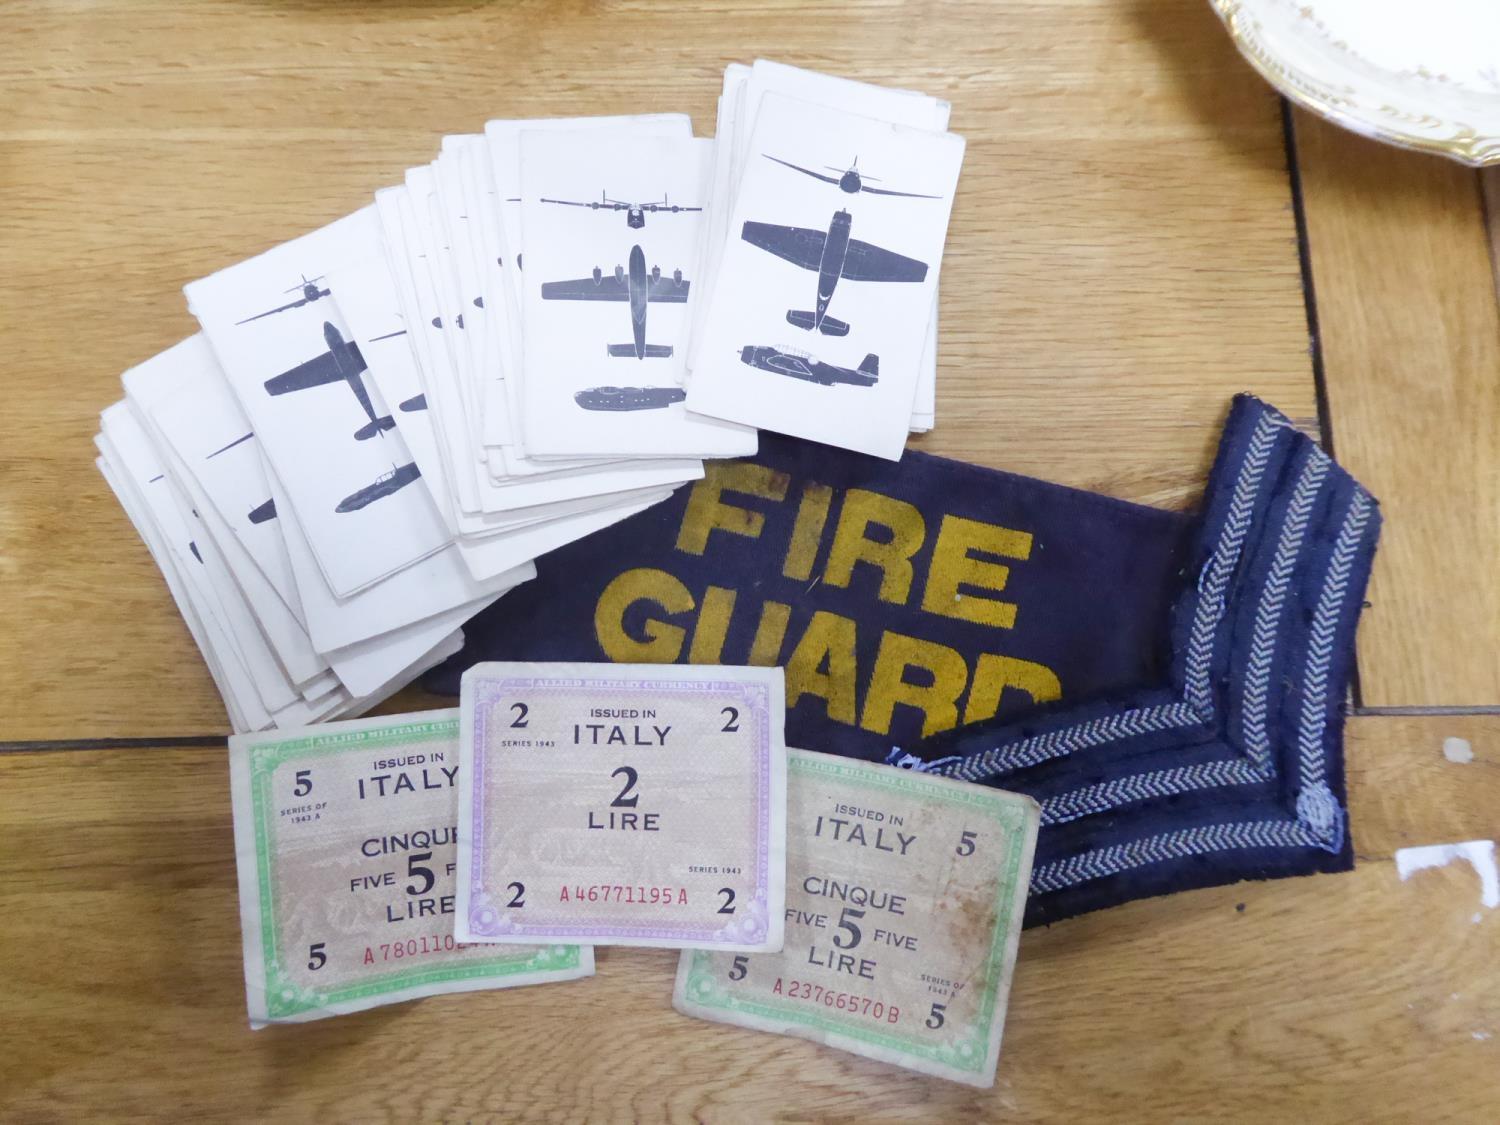 APPROXIMATELY 62 WORLD WAR II AIRCRAFT RECOGNITION CARDS, a FABRIC 'FIRE GUARD' ARMBAND, a few